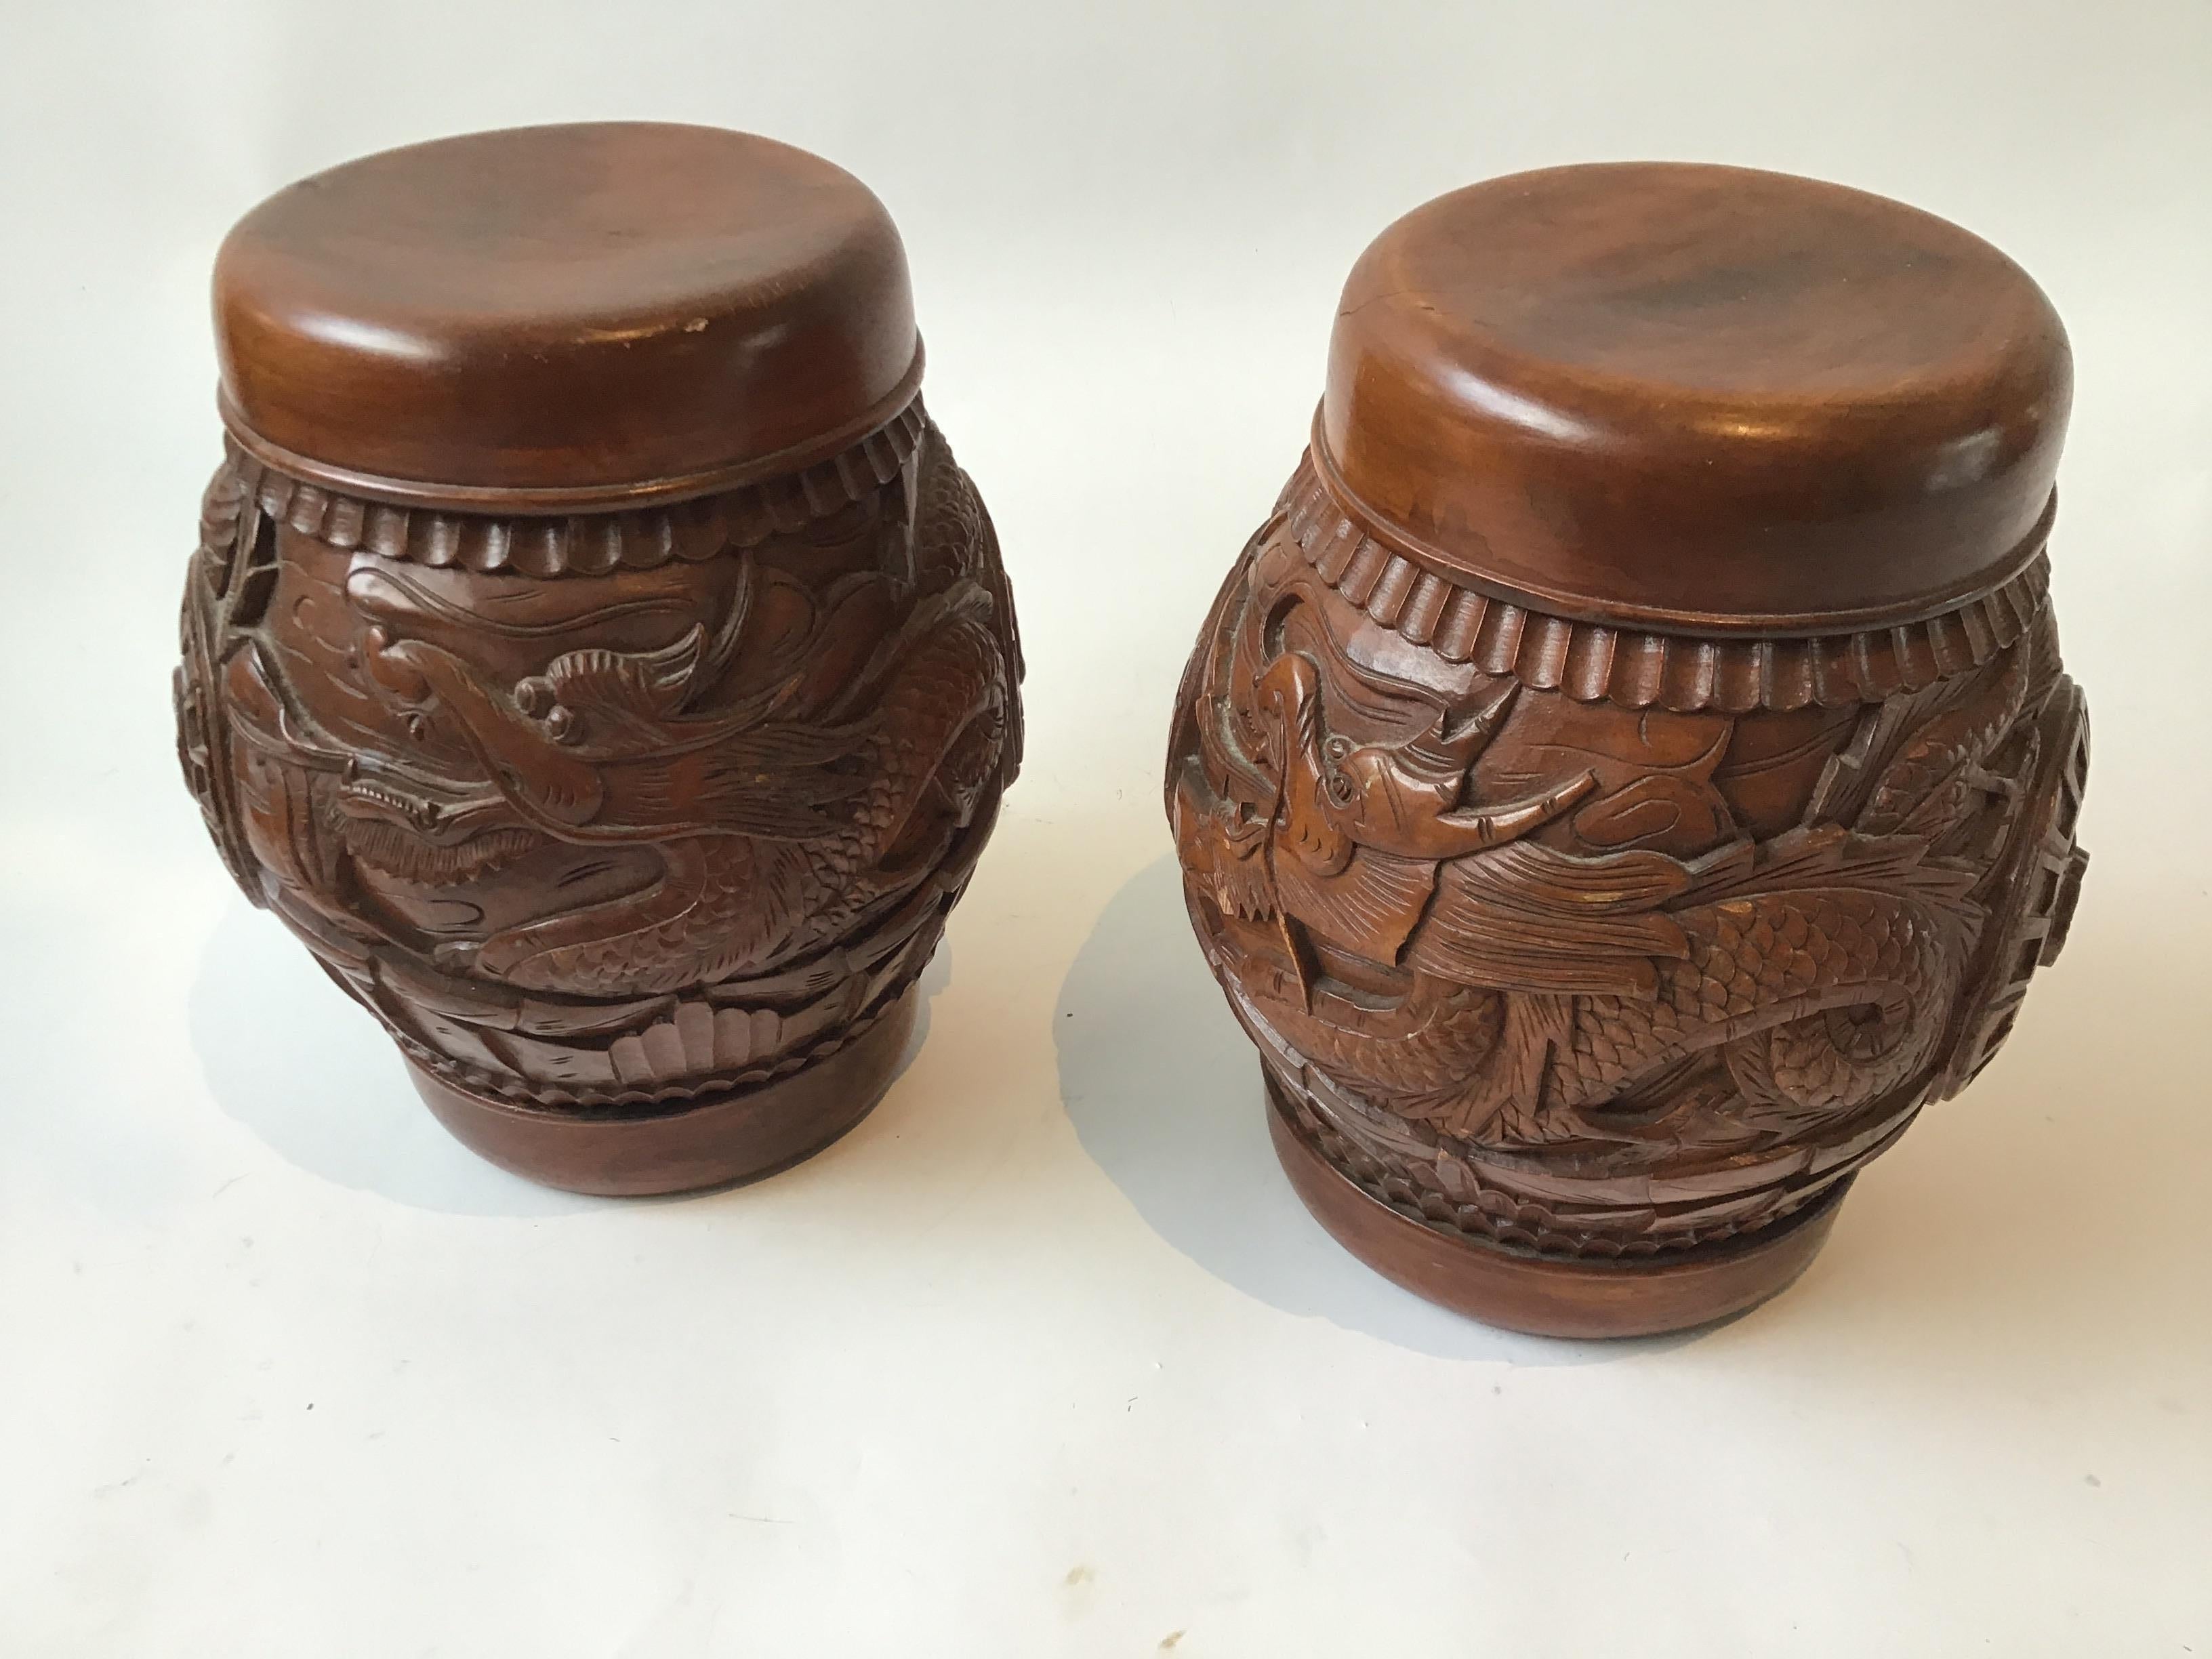 Pair of carved wood Asian dragon covered jars. From a Southampton, NY estate.